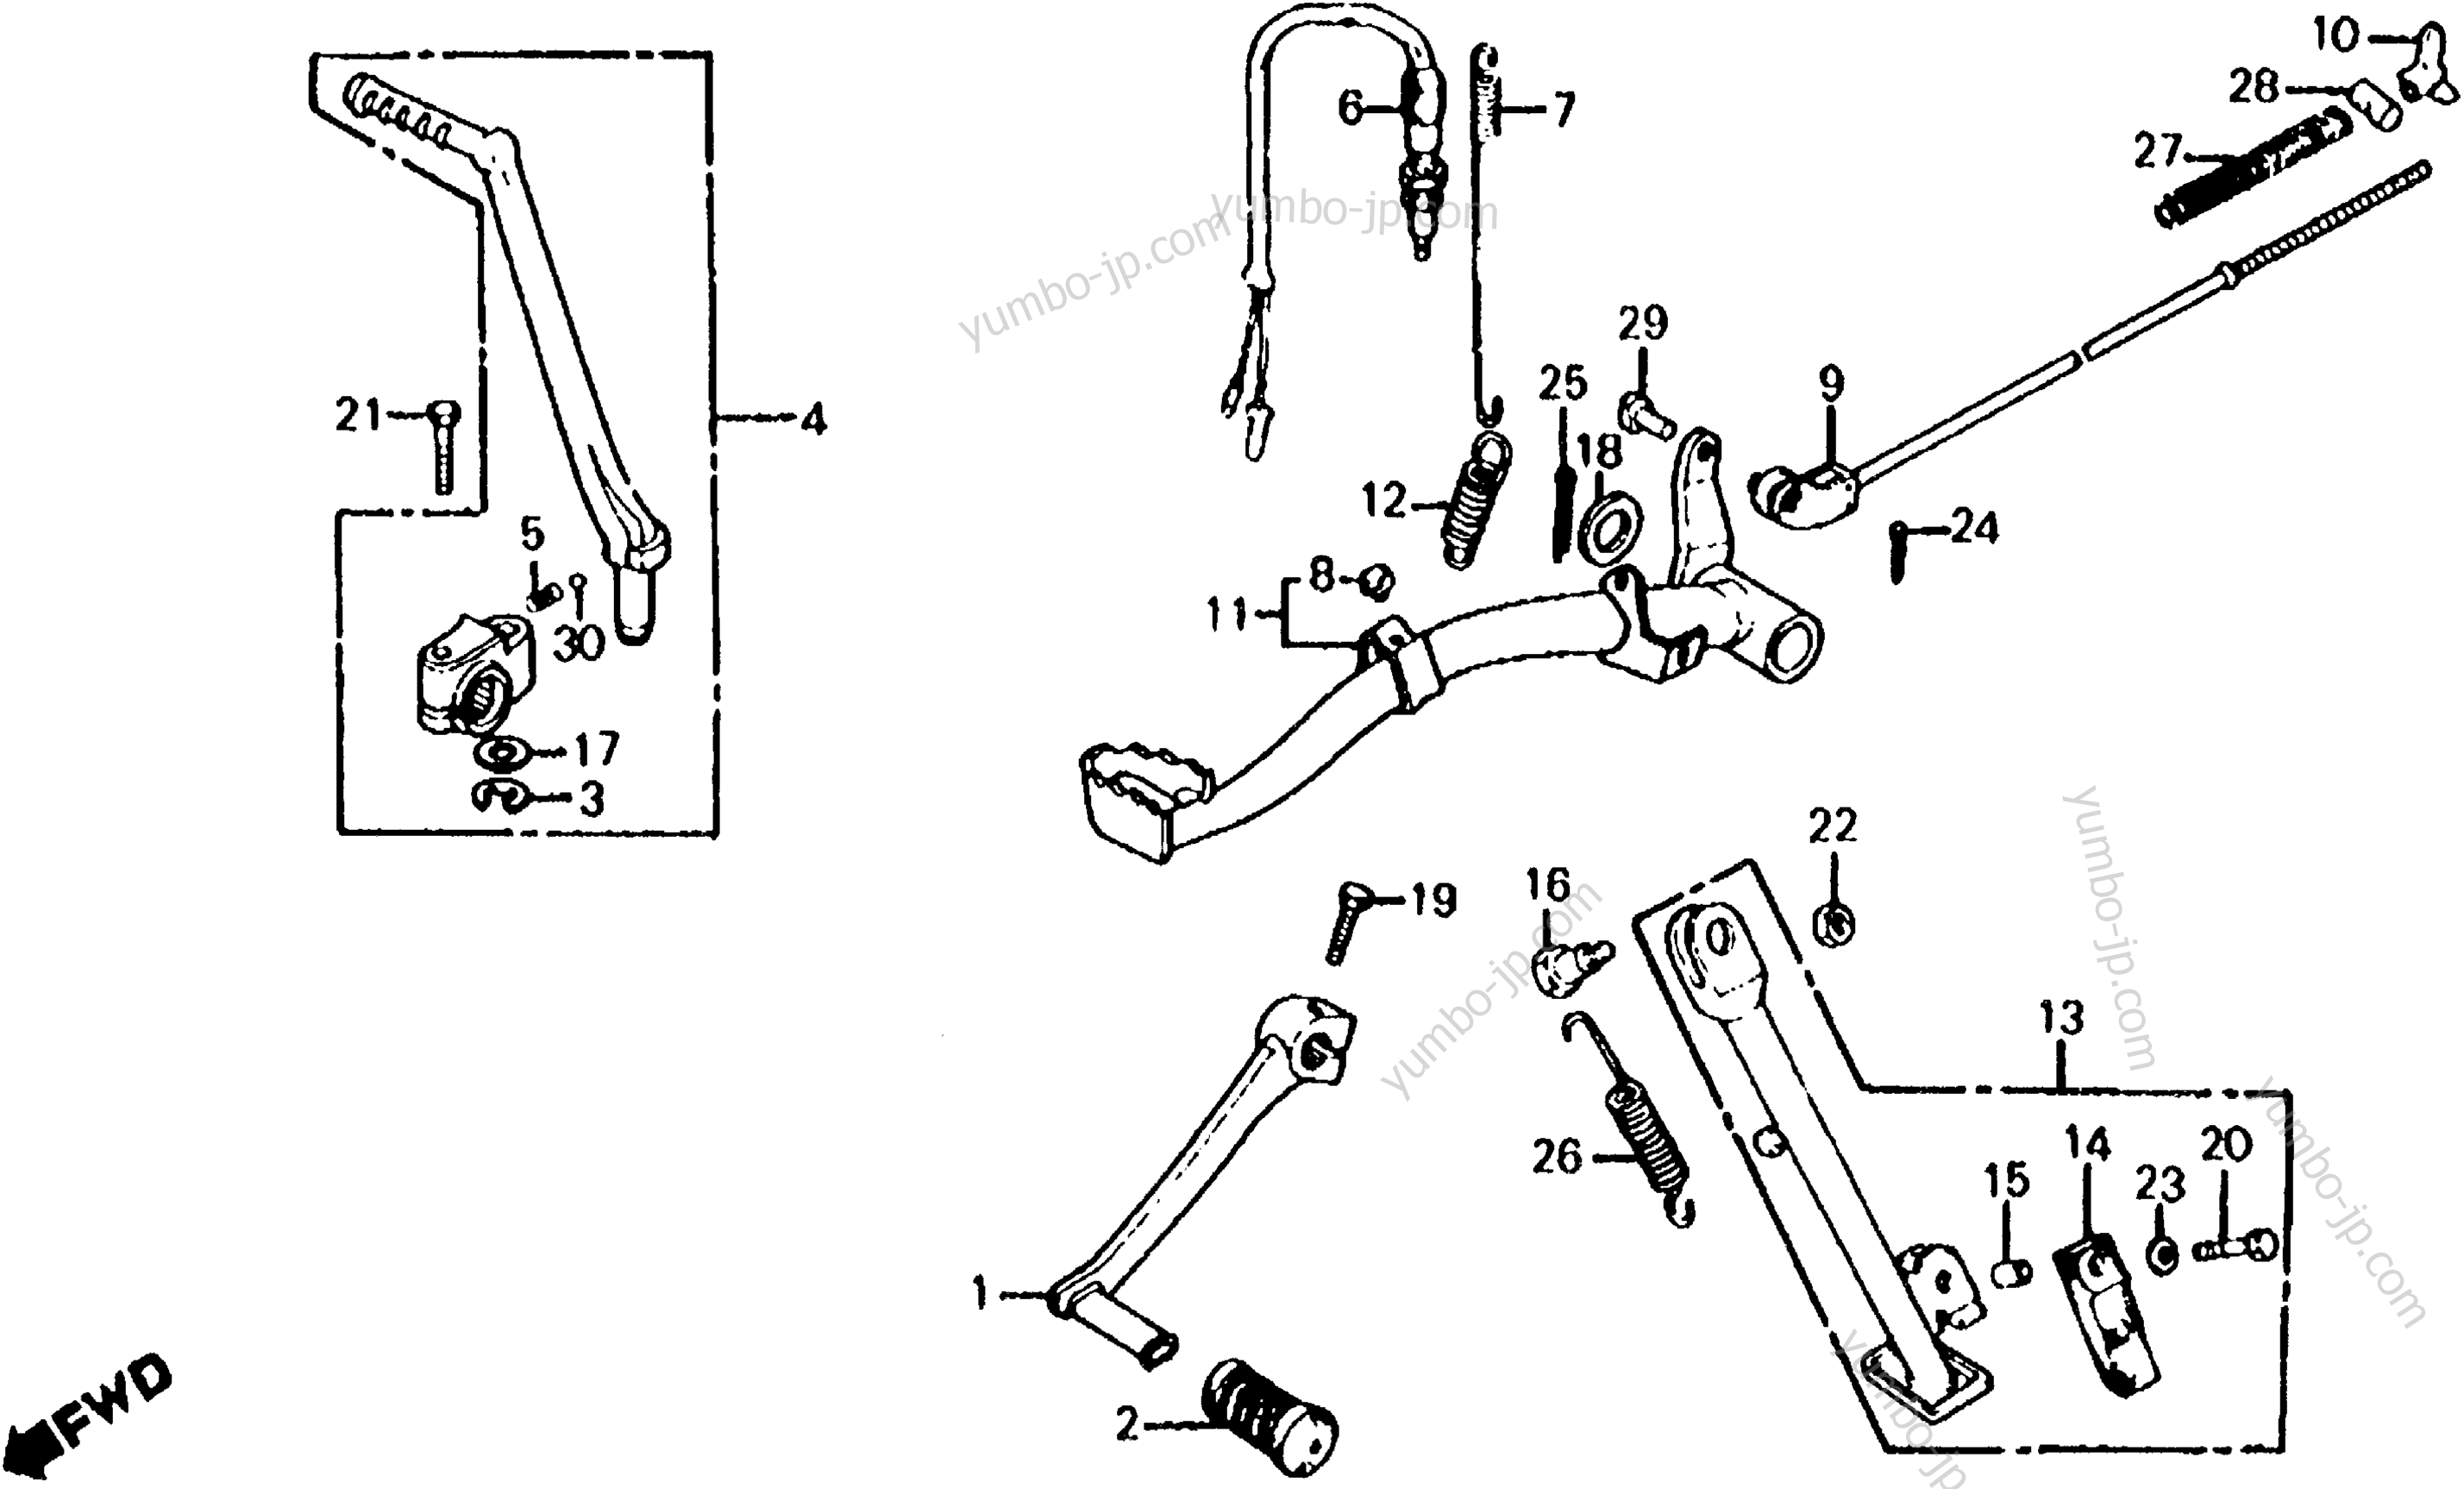 BRAKE PEDAL / GEARSHIFT PEDAL / KICK STARTER ARM for motorcycles HONDA XL100S A 1983 year